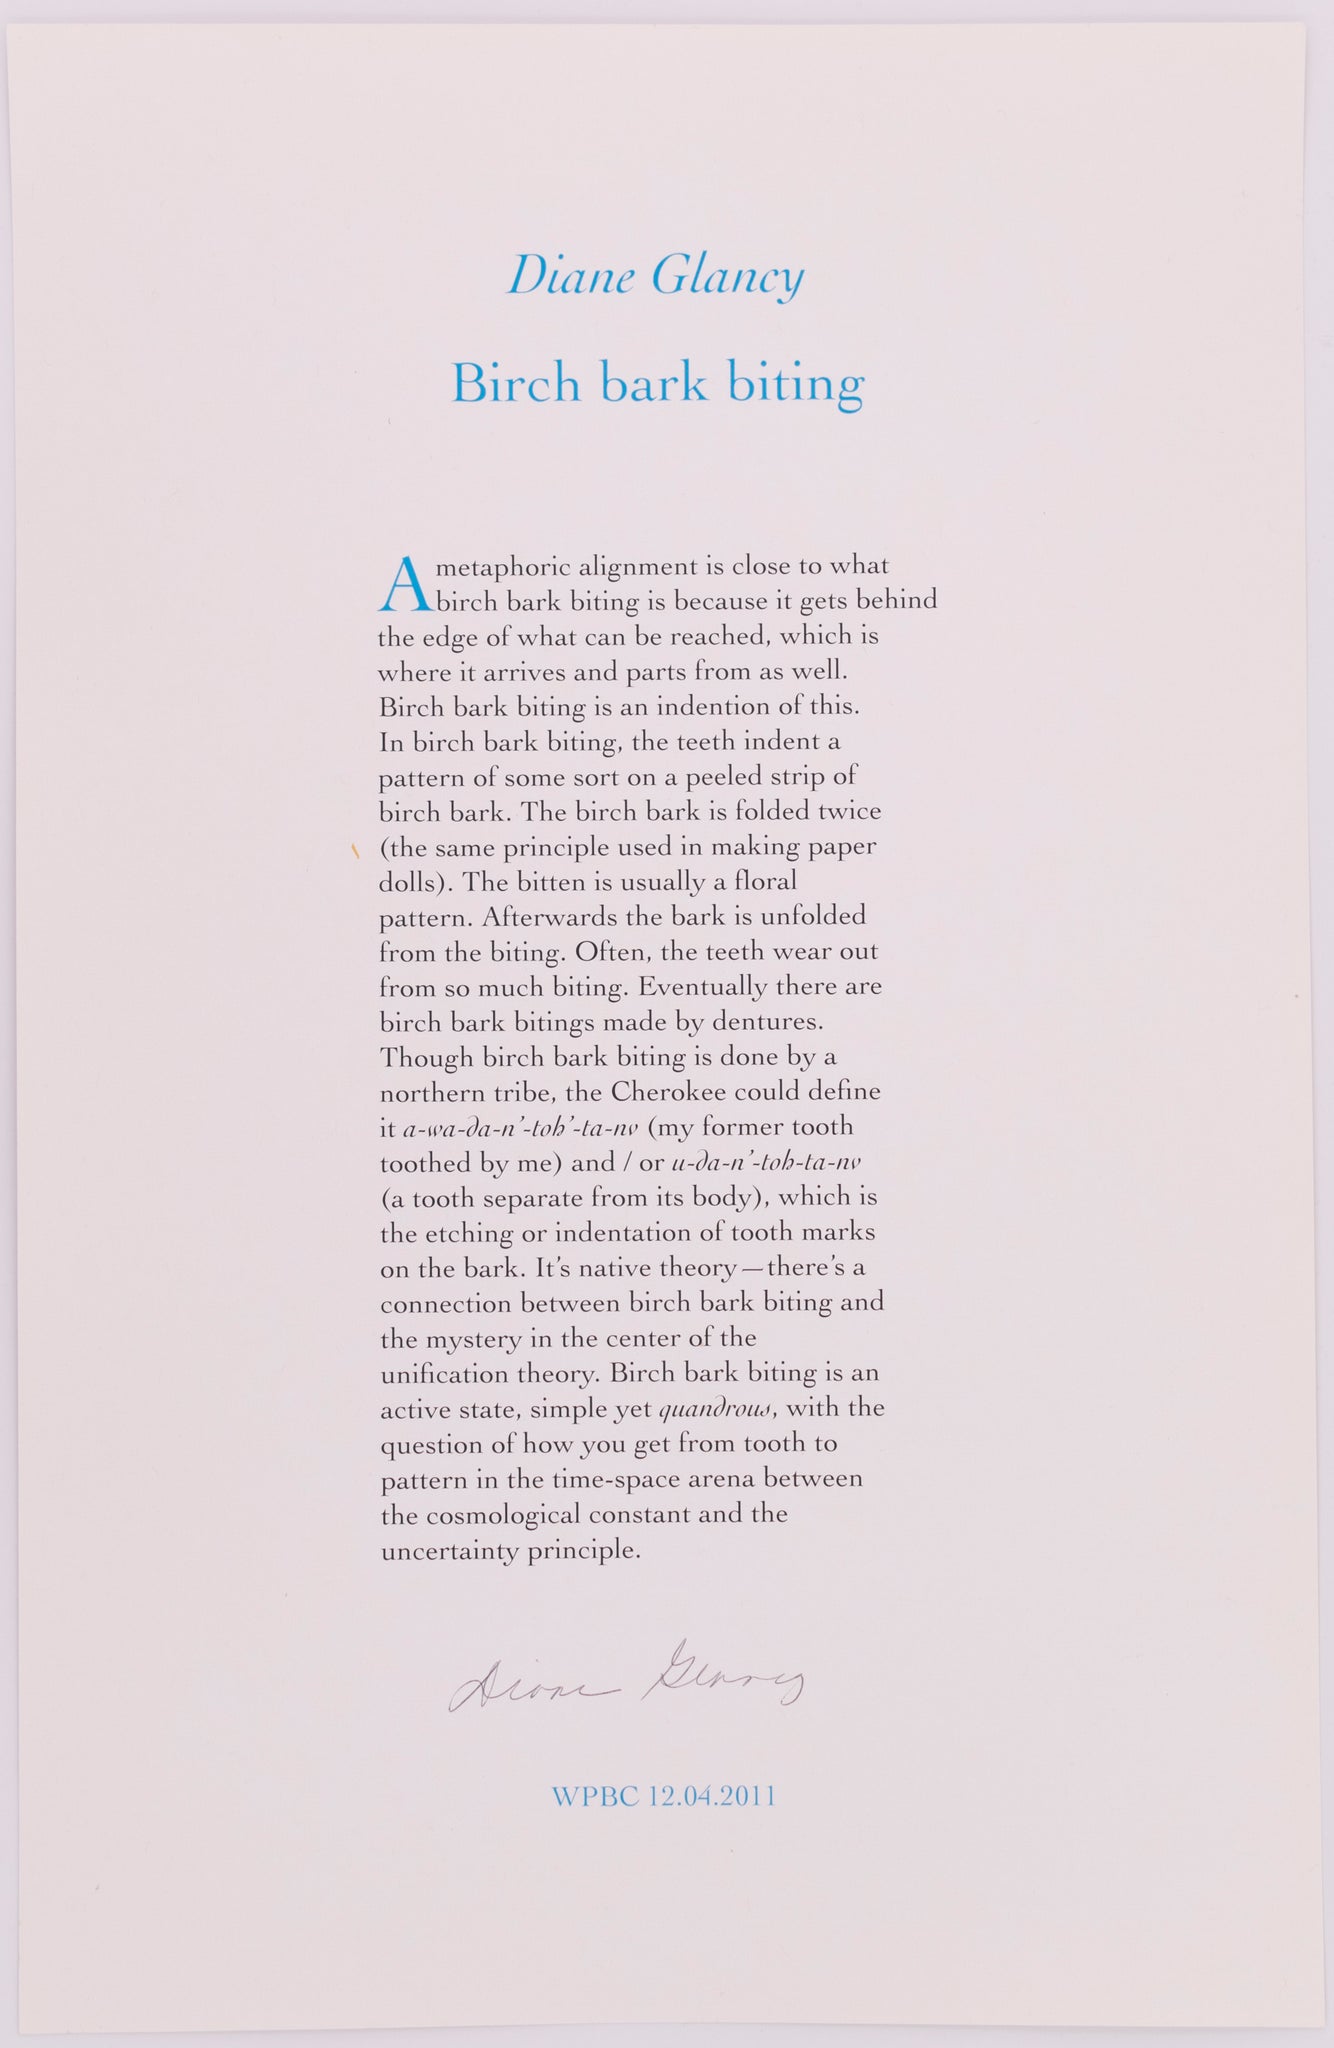 Broadside titled Birch Bark Biting by Diane Glancy. Blue and black text on grey paper.